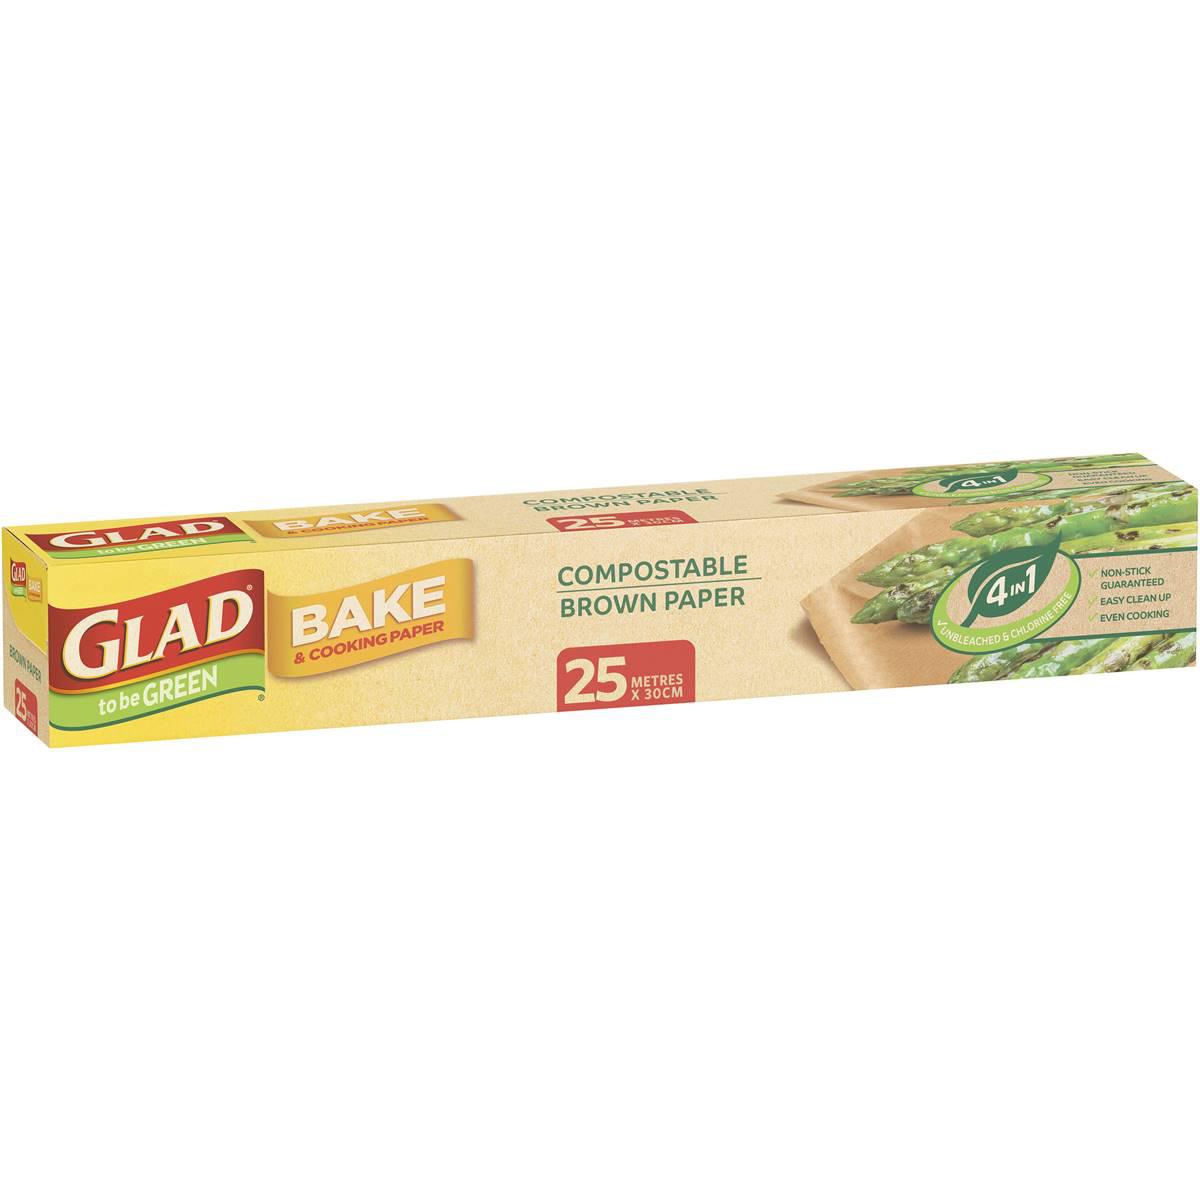 Glad To Be Green Compostable Brown Bake & Cooking Paper 25m 1 Pack